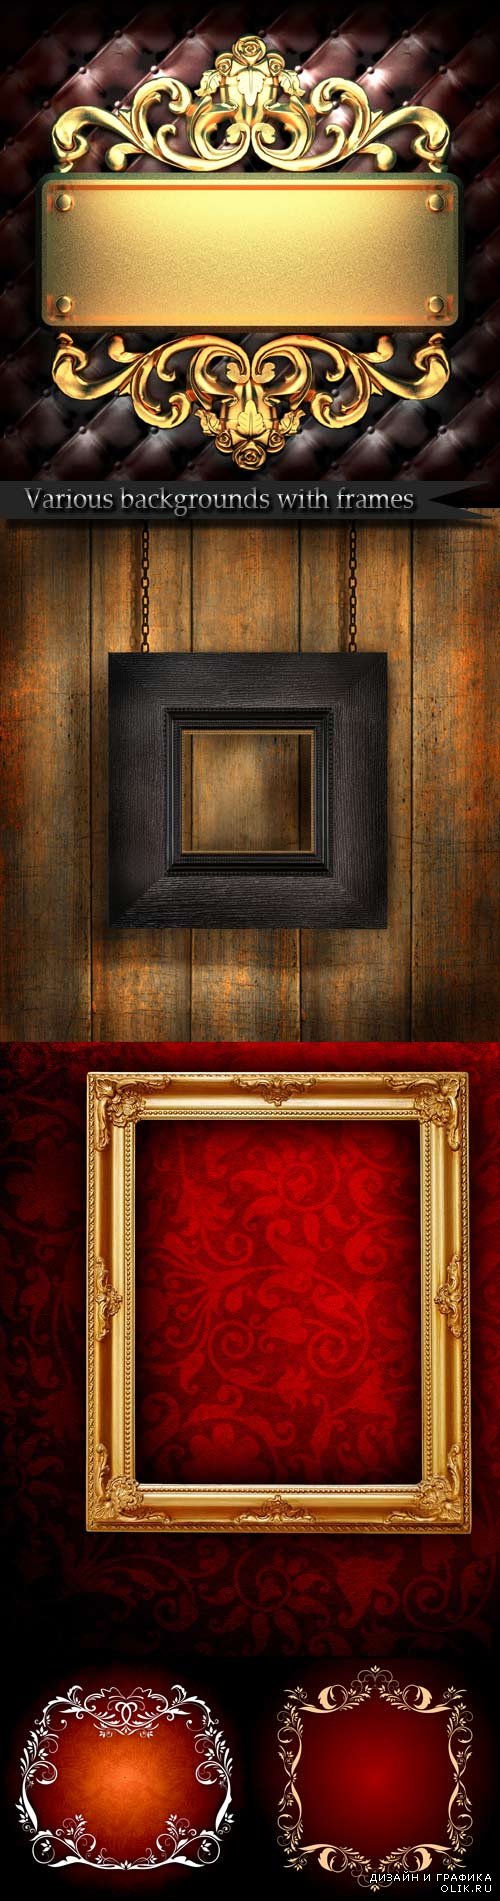 Various backgrounds with frames